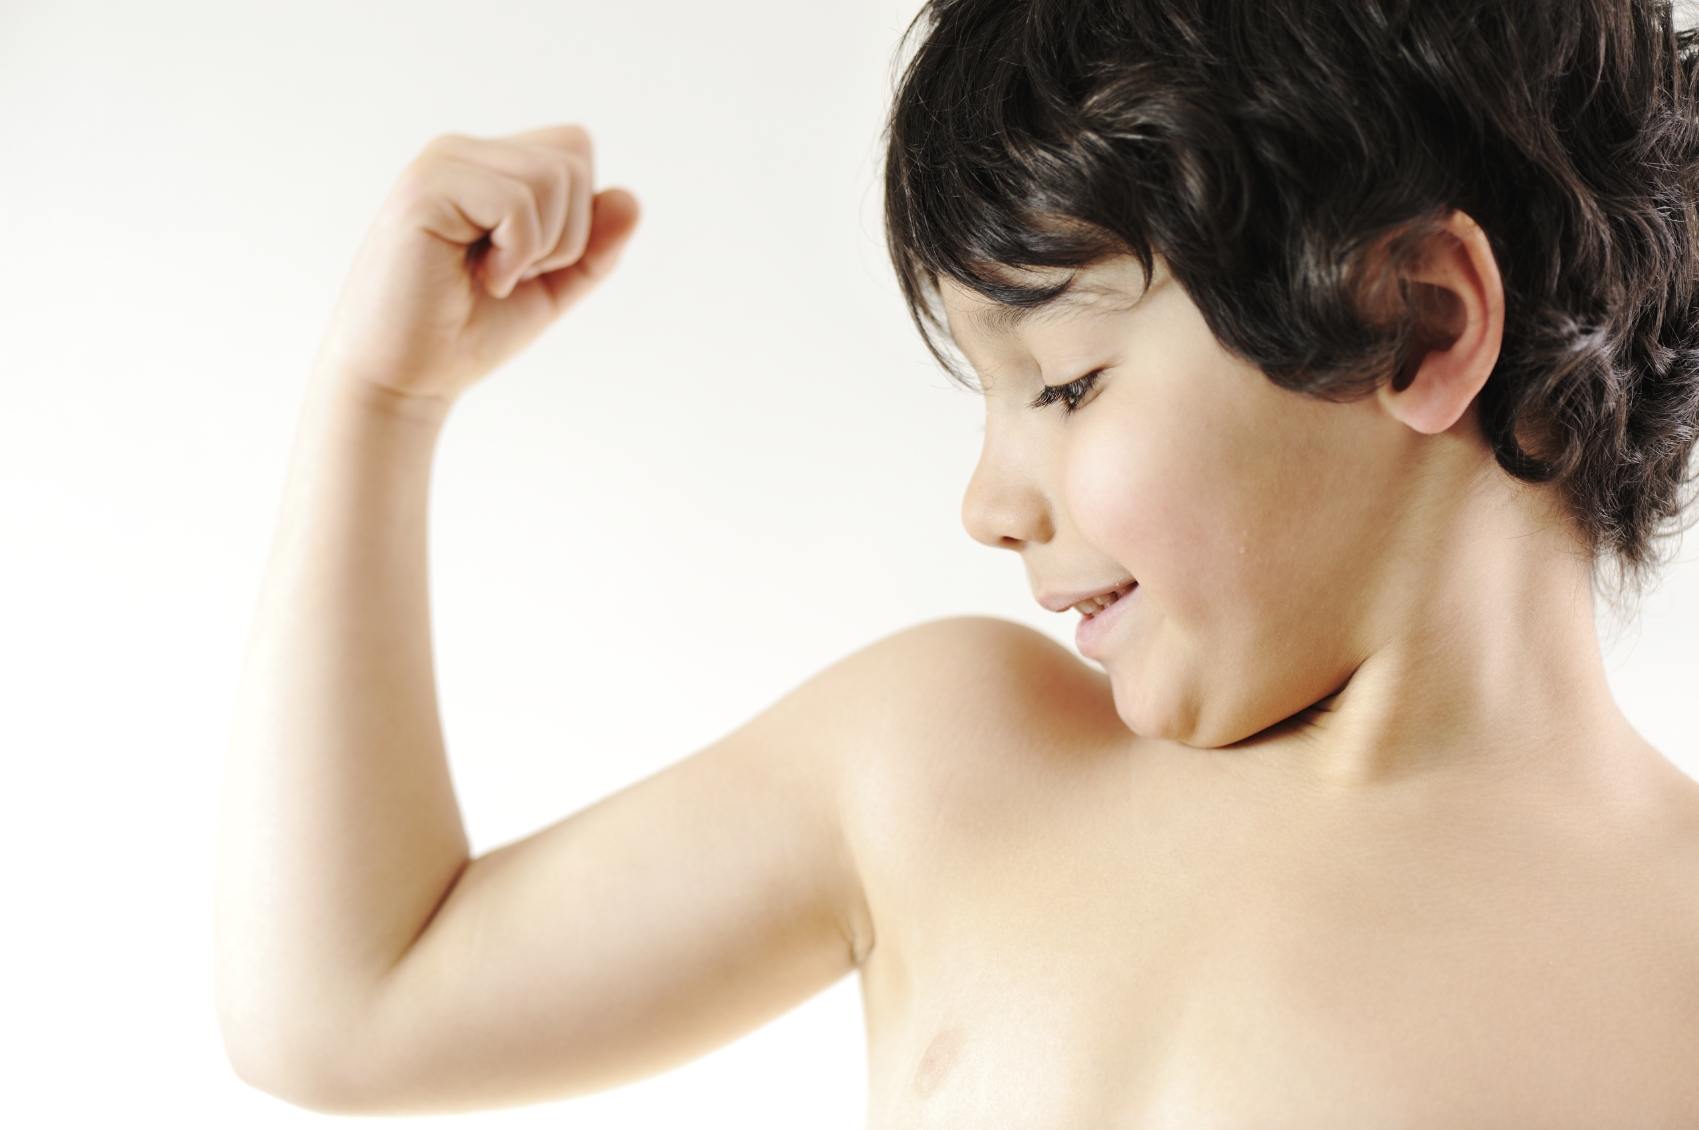 Child showing the muscles of his arms